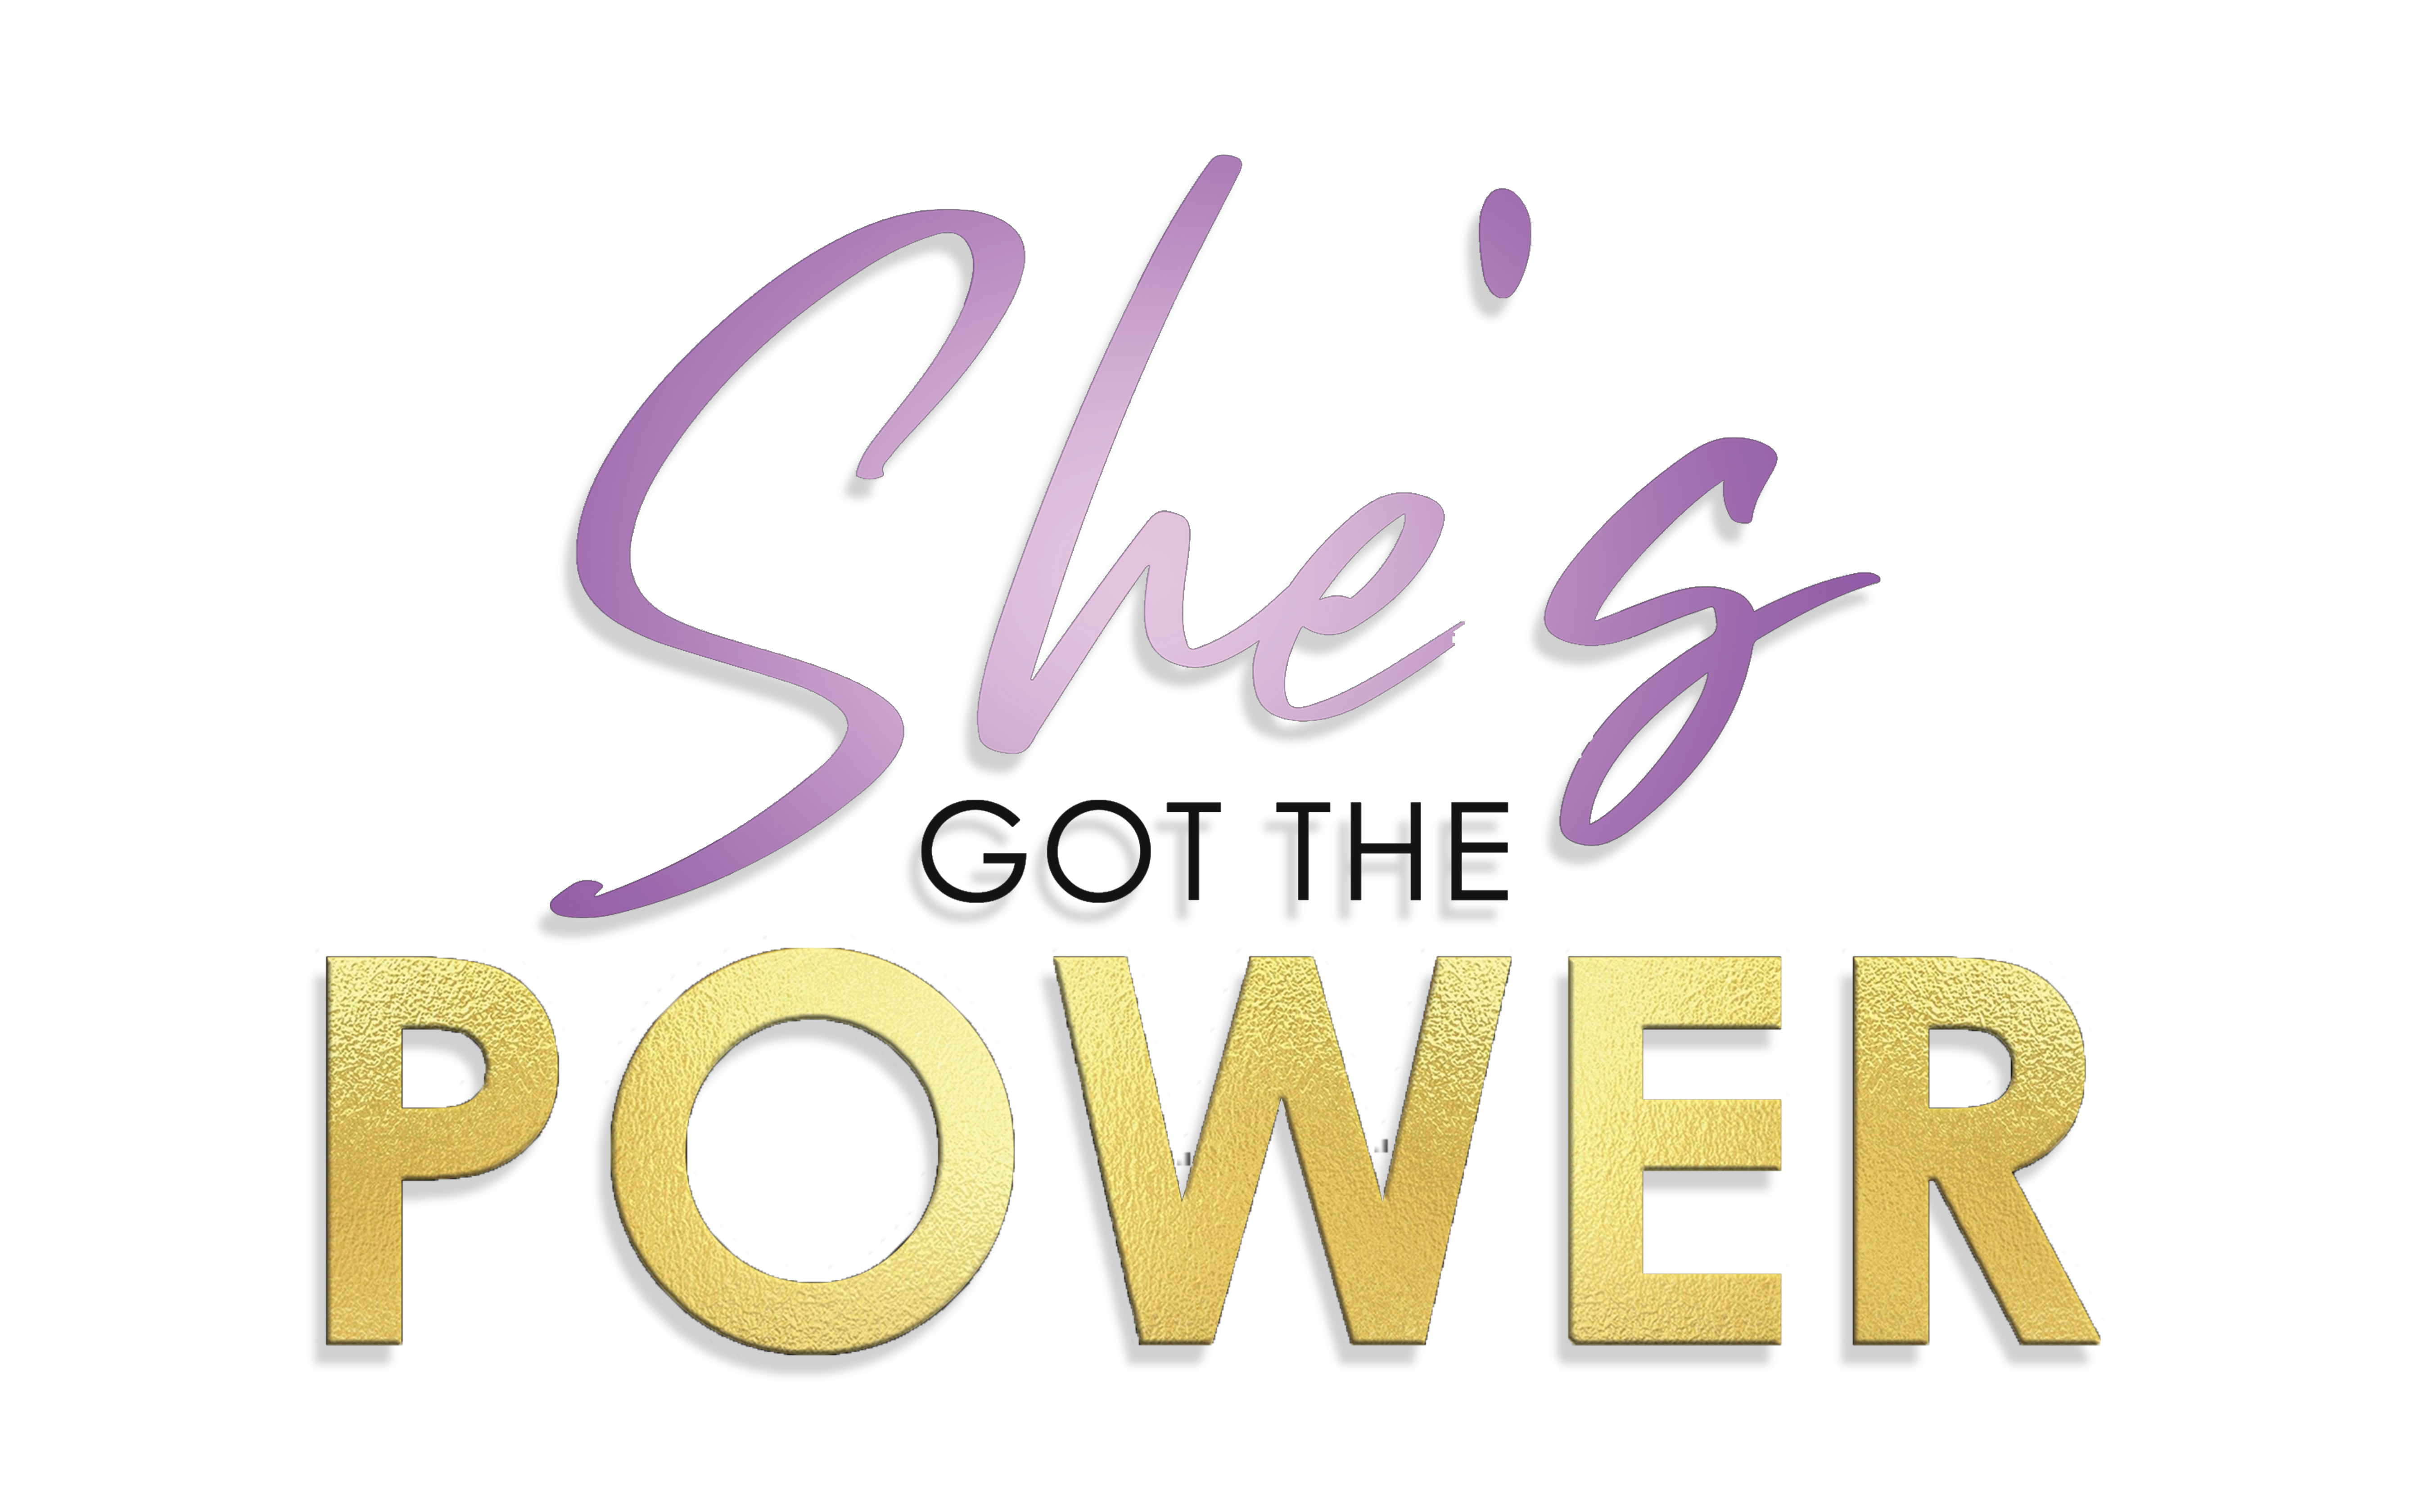 Shes got the power book logo with shadow and styling